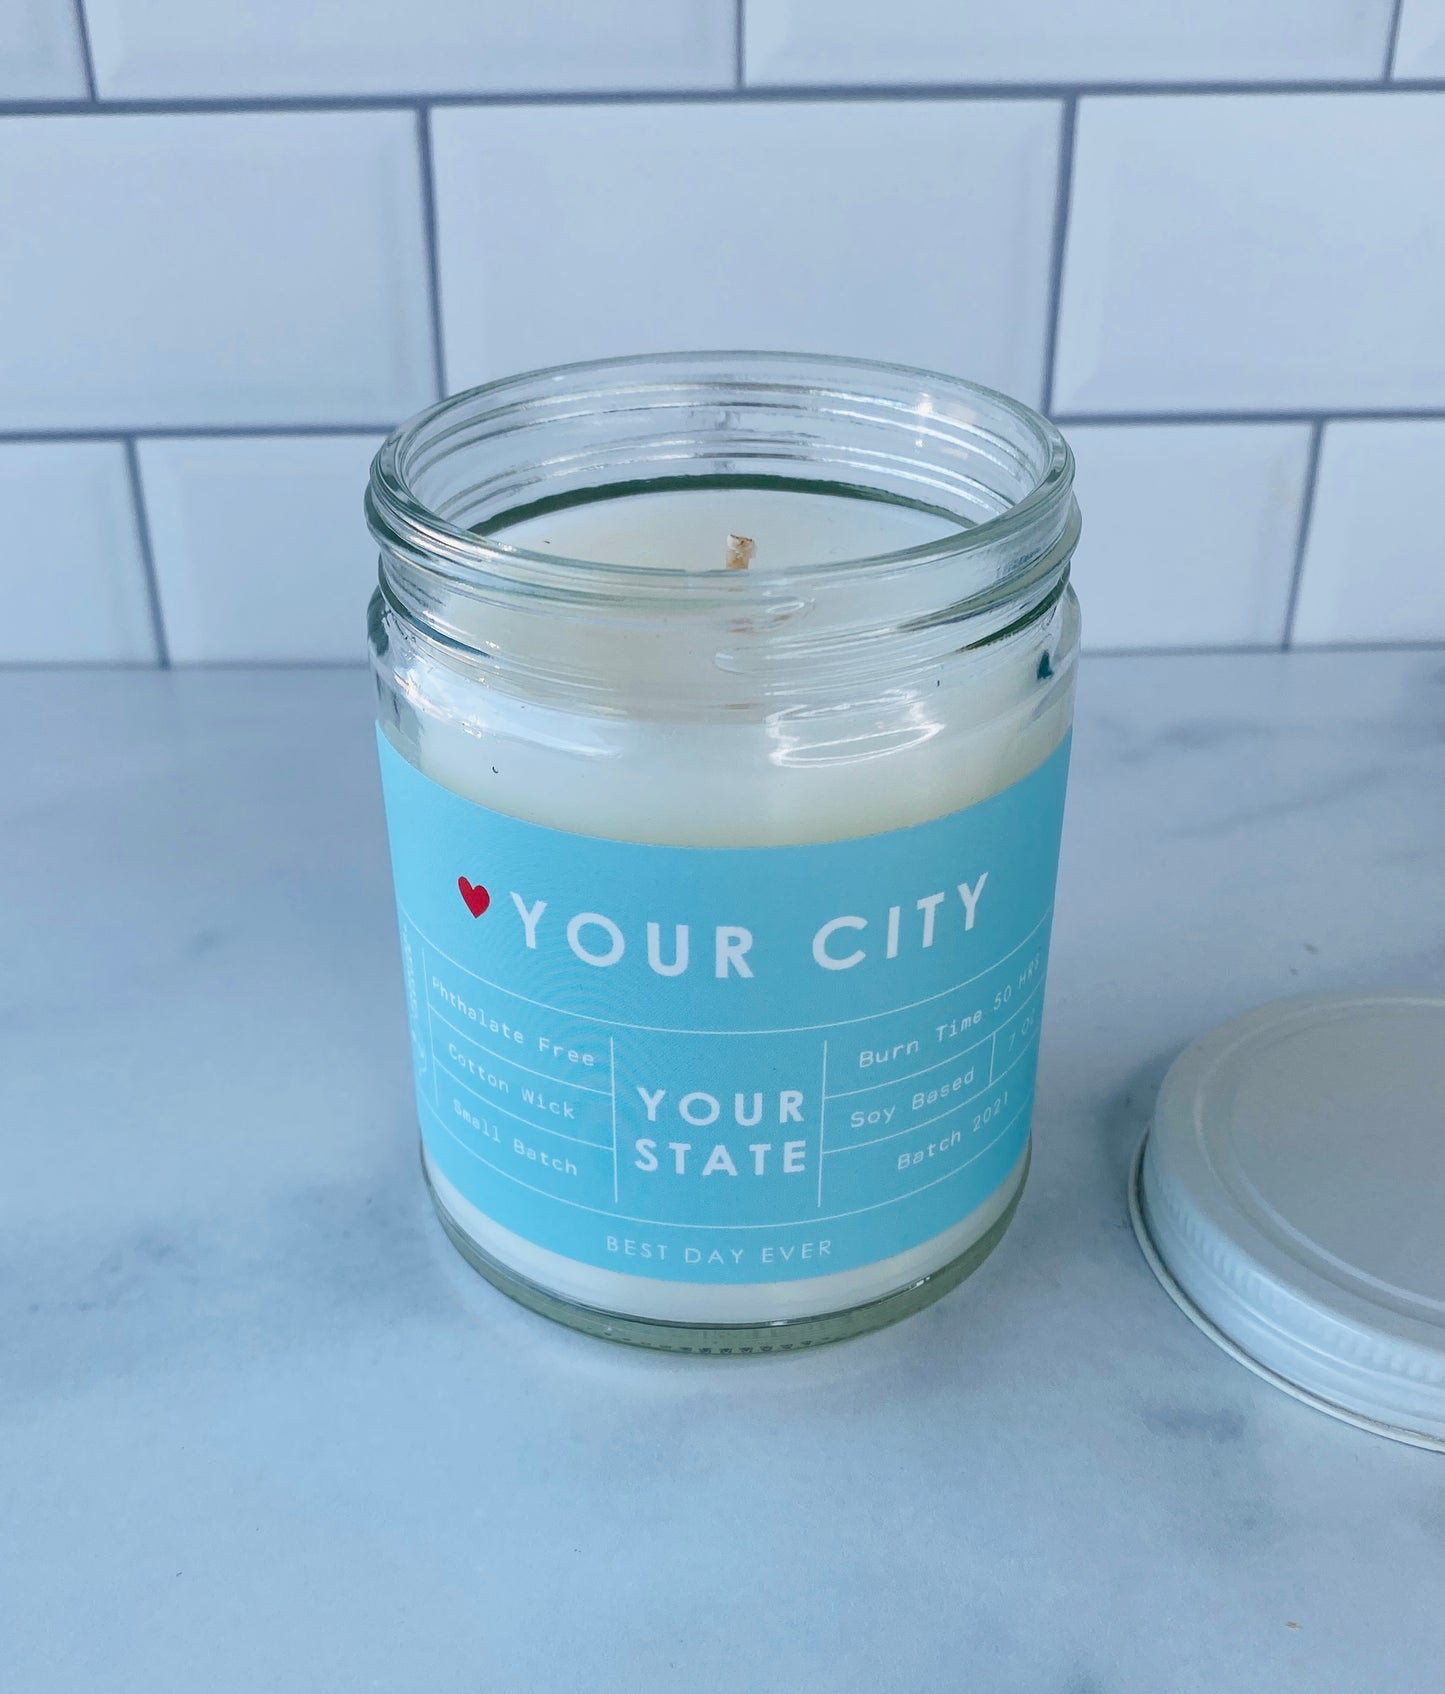 Your City-Your State Custom Candle Bulk Order